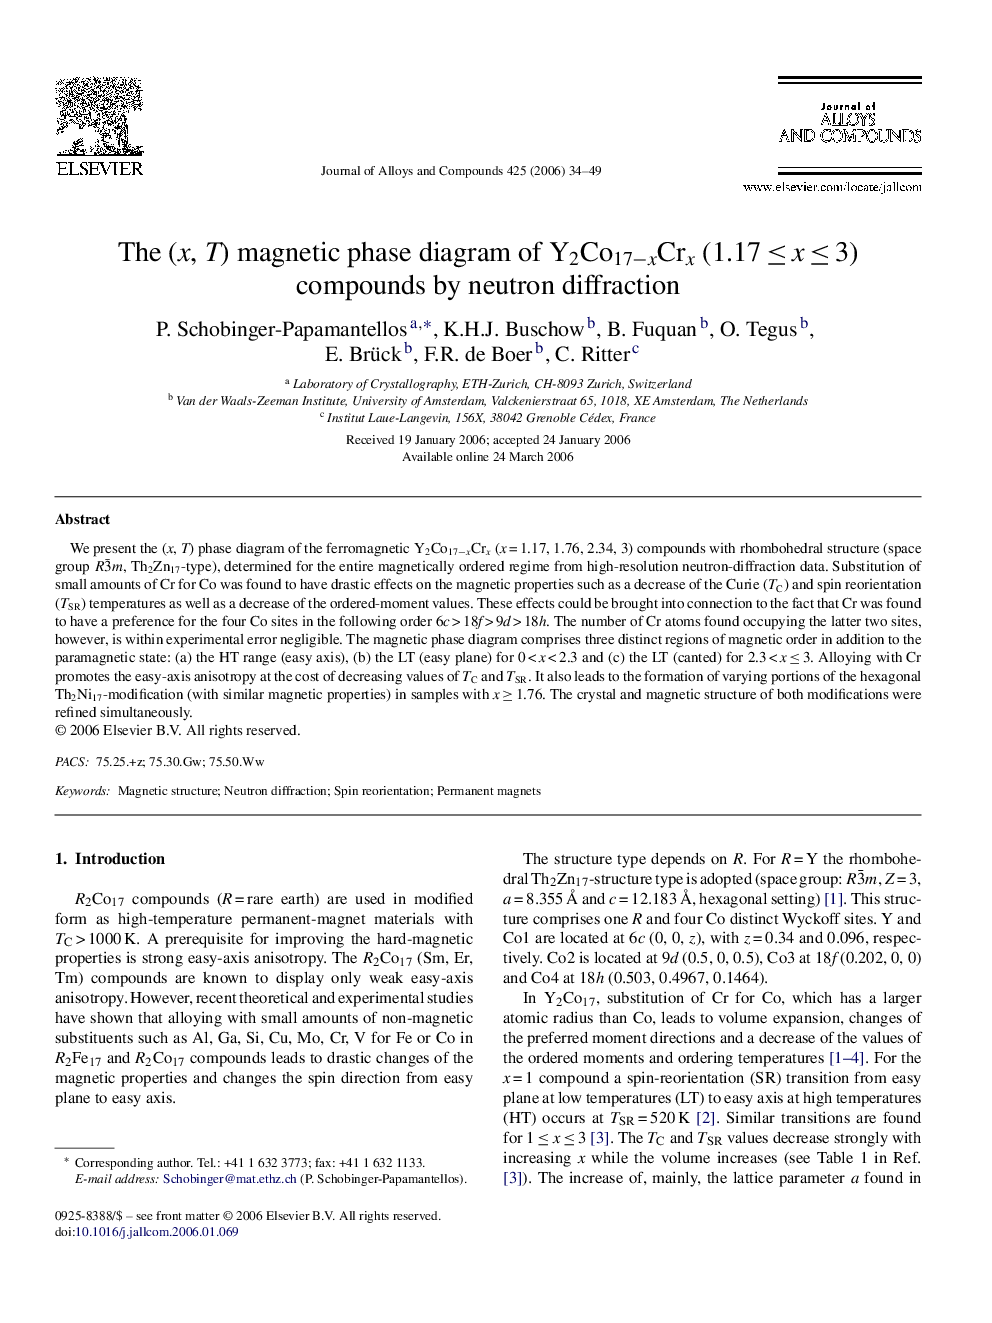 The (x, T) magnetic phase diagram of Y2Co17−xCrx (1.17 ≤ x ≤ 3) compounds by neutron diffraction